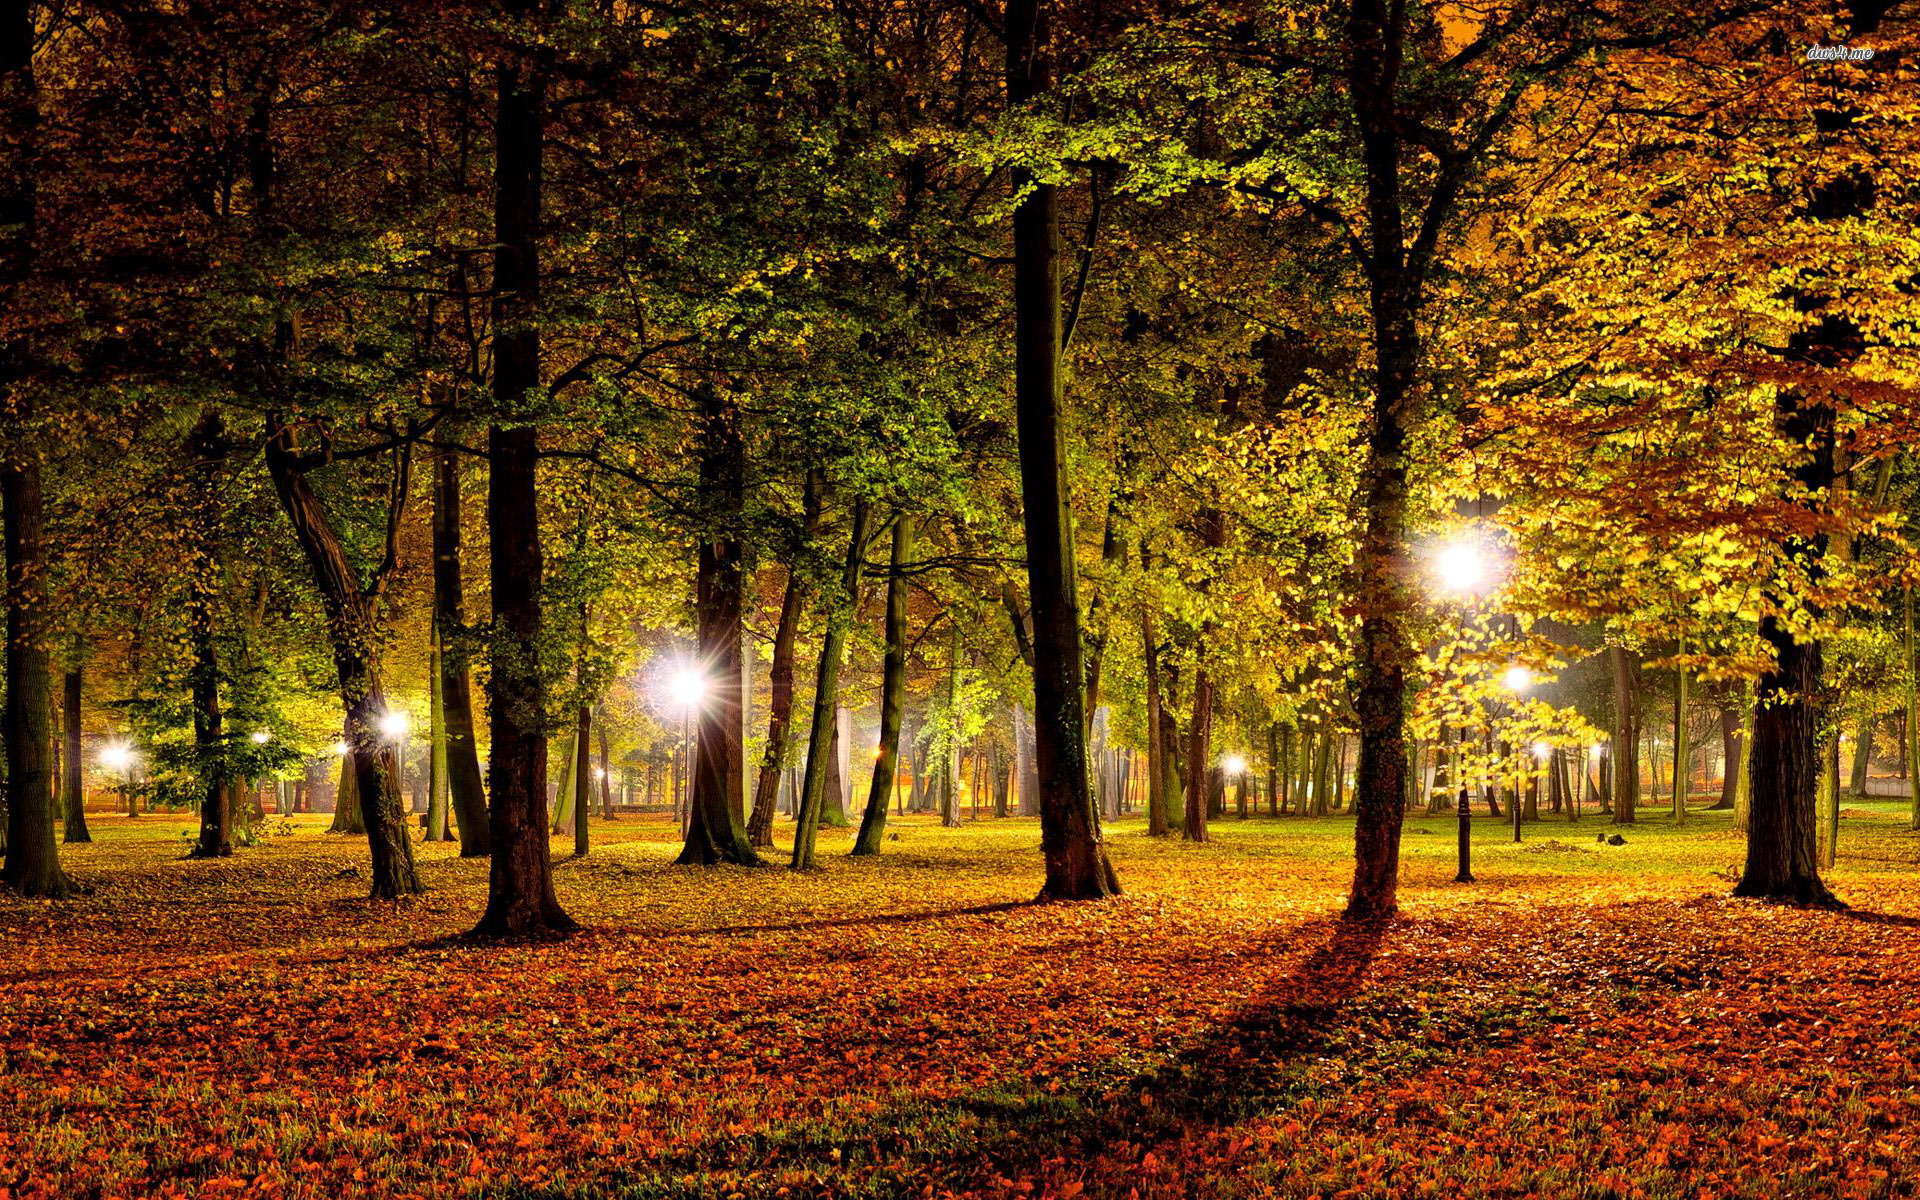 Street Lamps In The Autumn Park Wallpaper